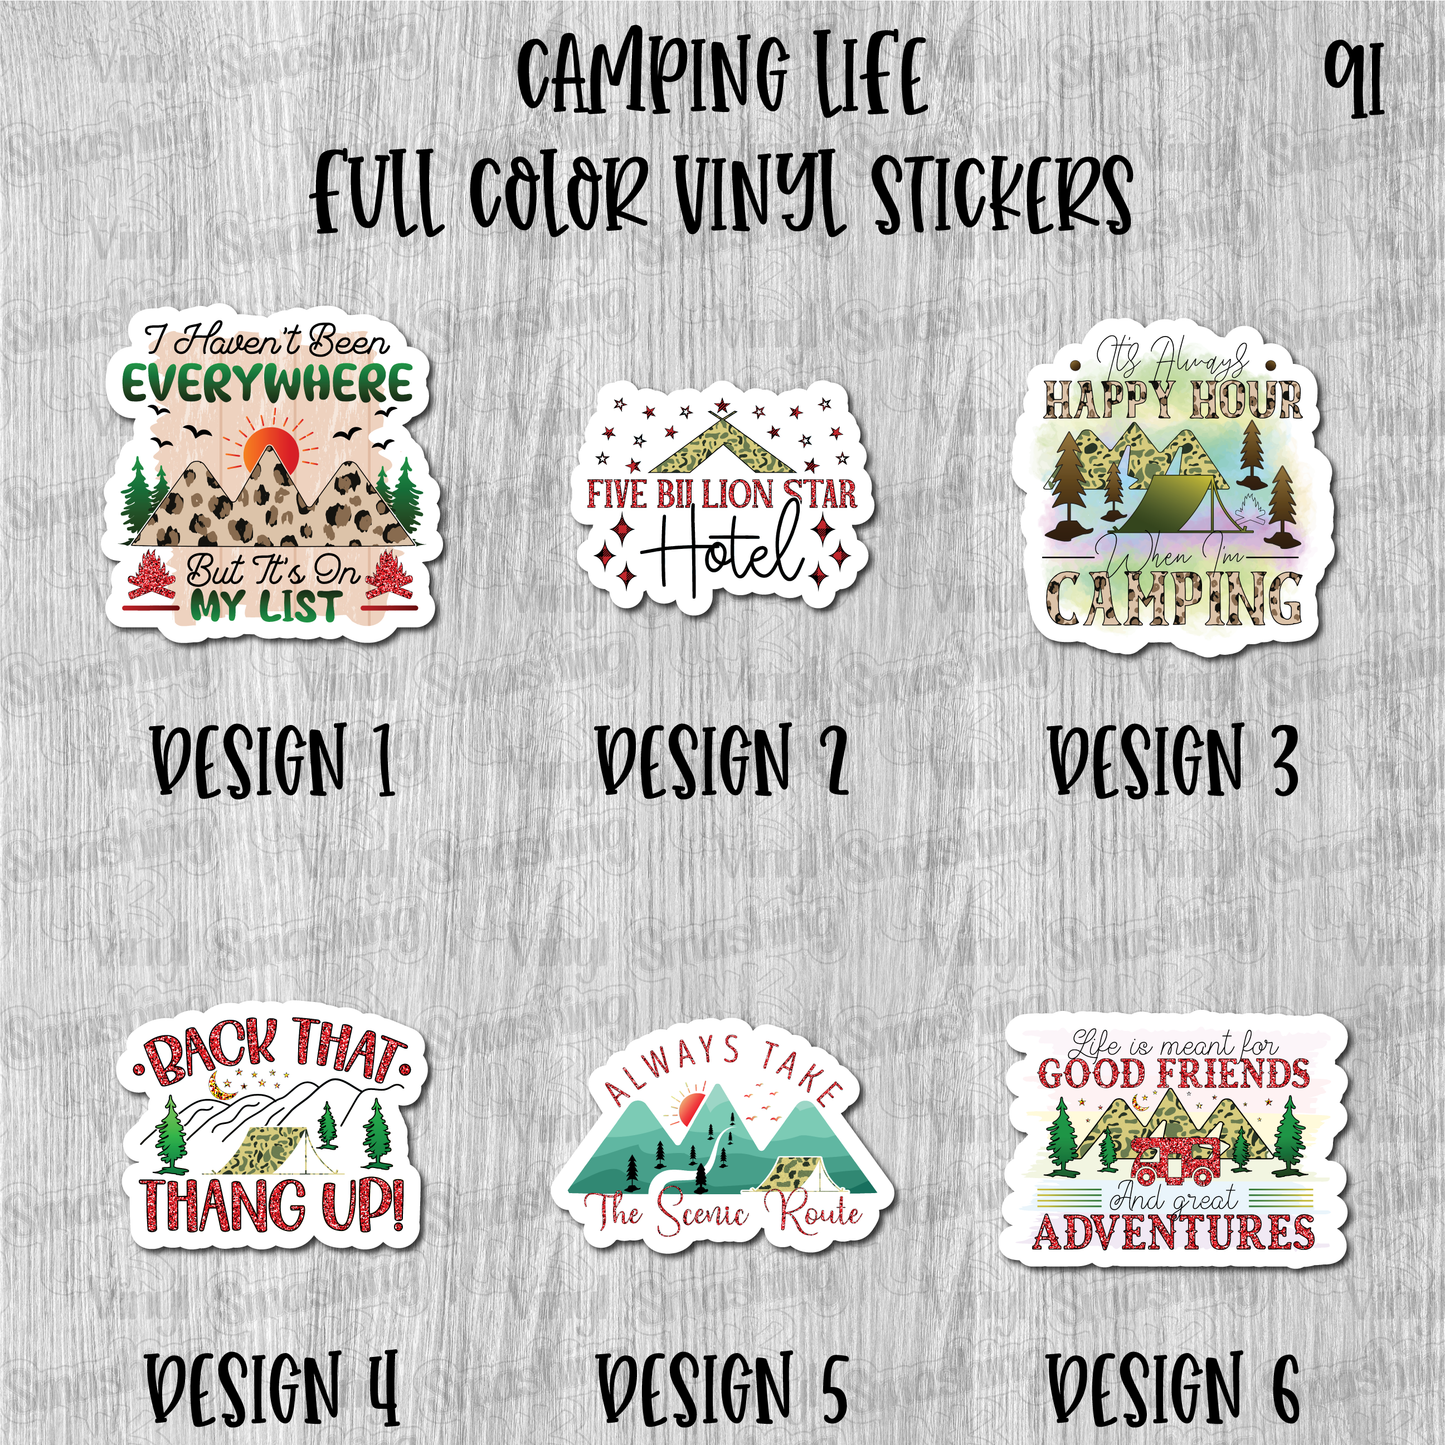 Camping Life - Full Color Vinyl Stickers (SHIPS IN 3-7 BUS DAYS)